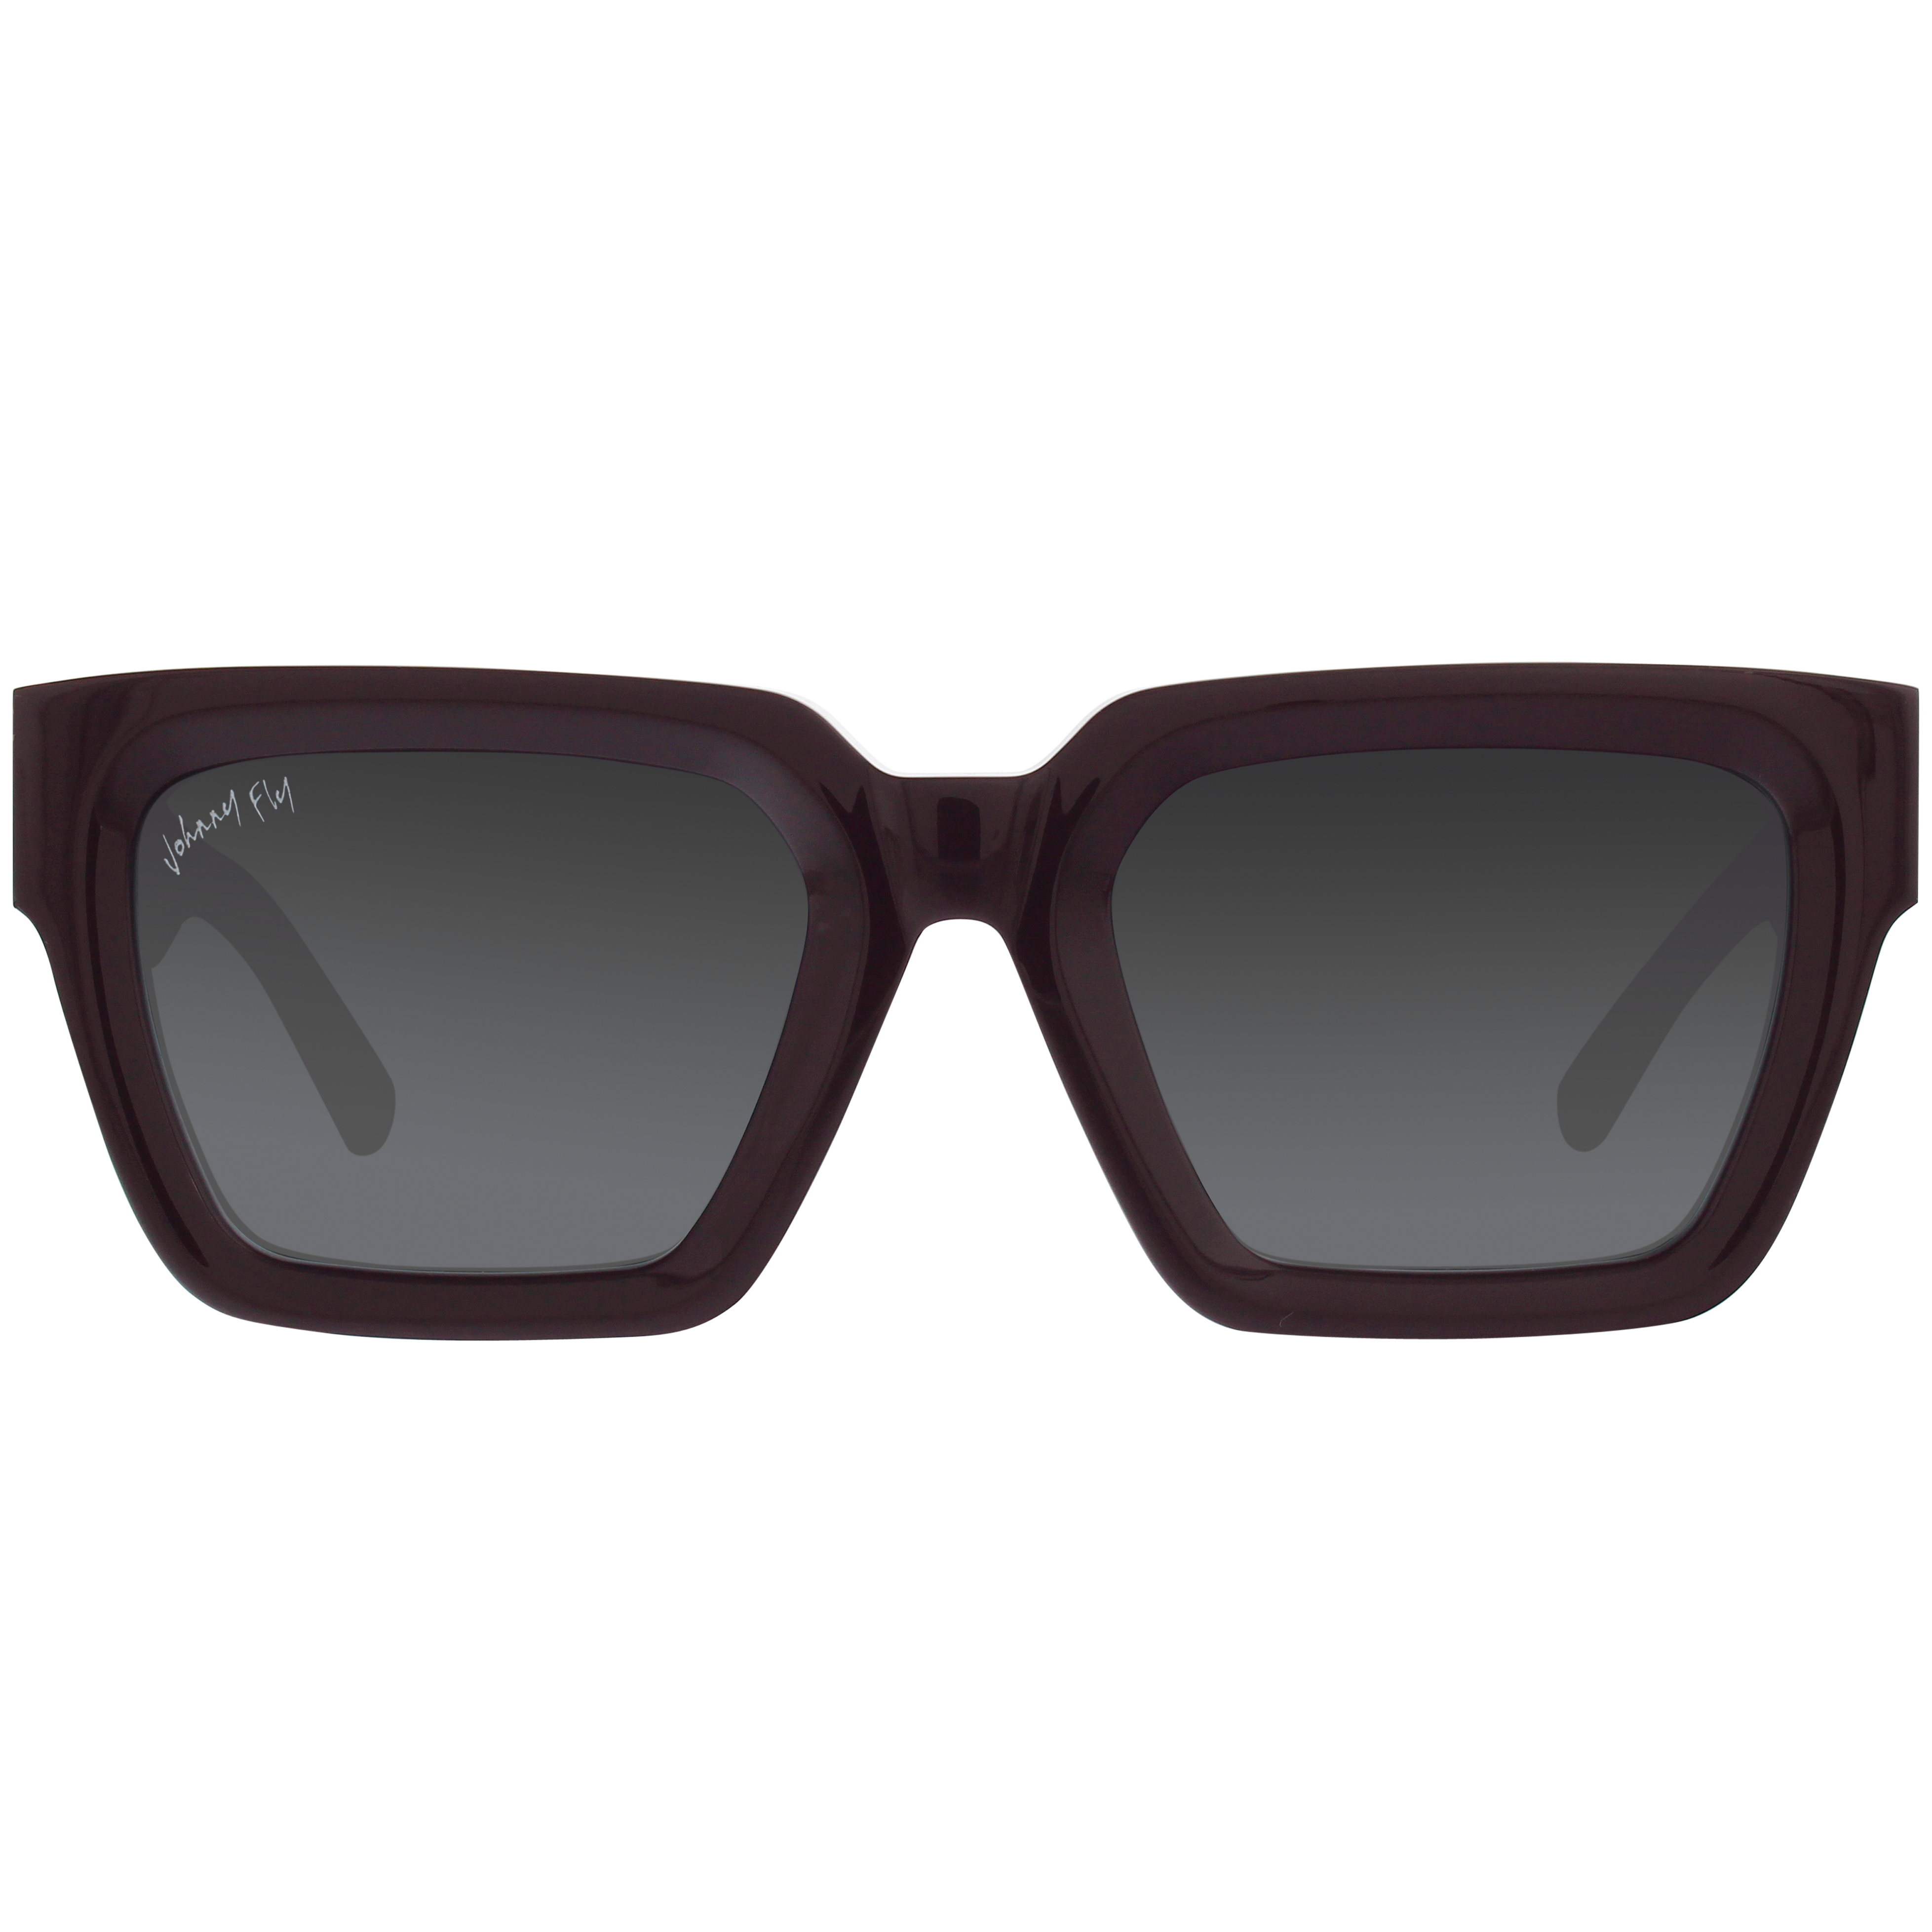 Fame Sunglasses by Johnny Fly | 